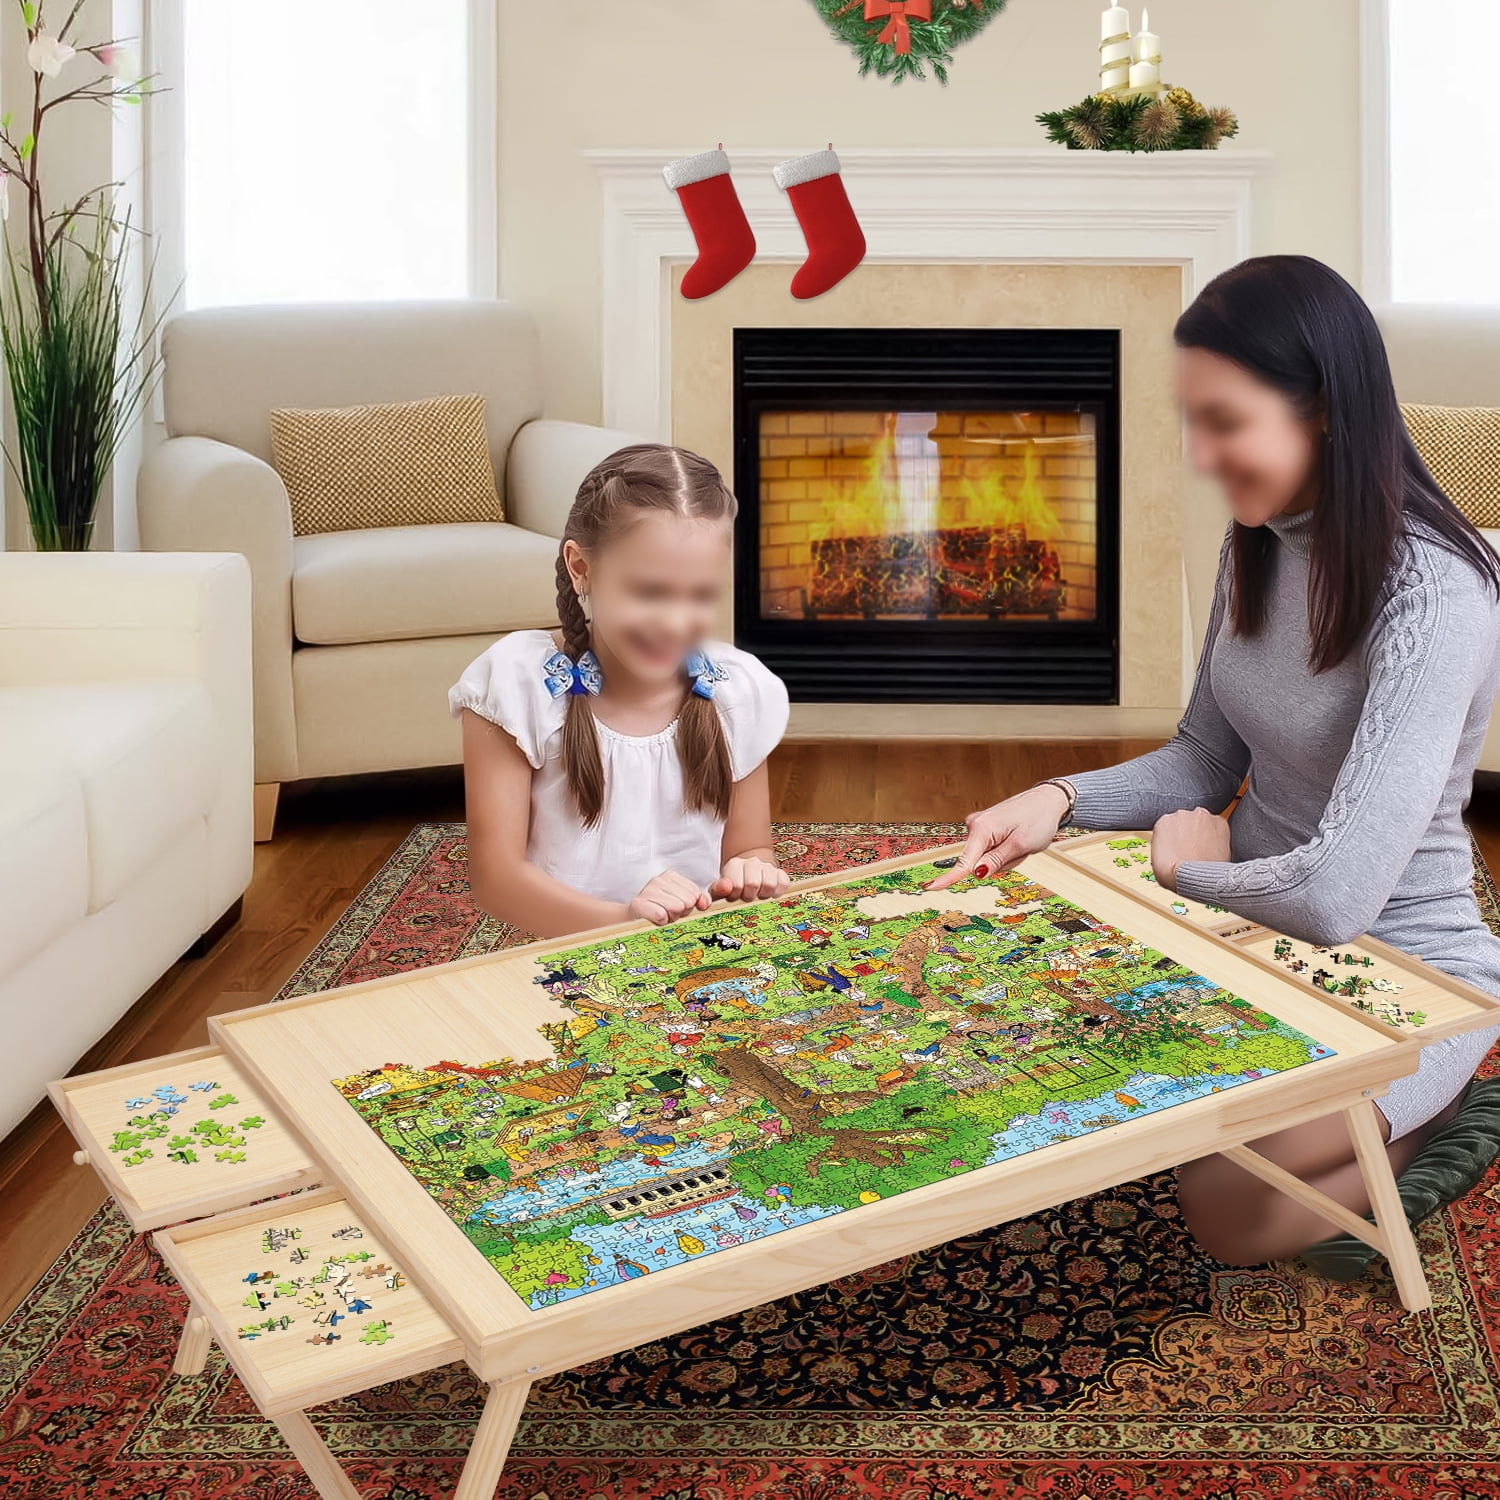 Puzzle Board With Foldable Legs 4 Drawers & Cover Wooden Puzzle Table  Puzzle Tray Portable for Sale in La Verne, CA - OfferUp